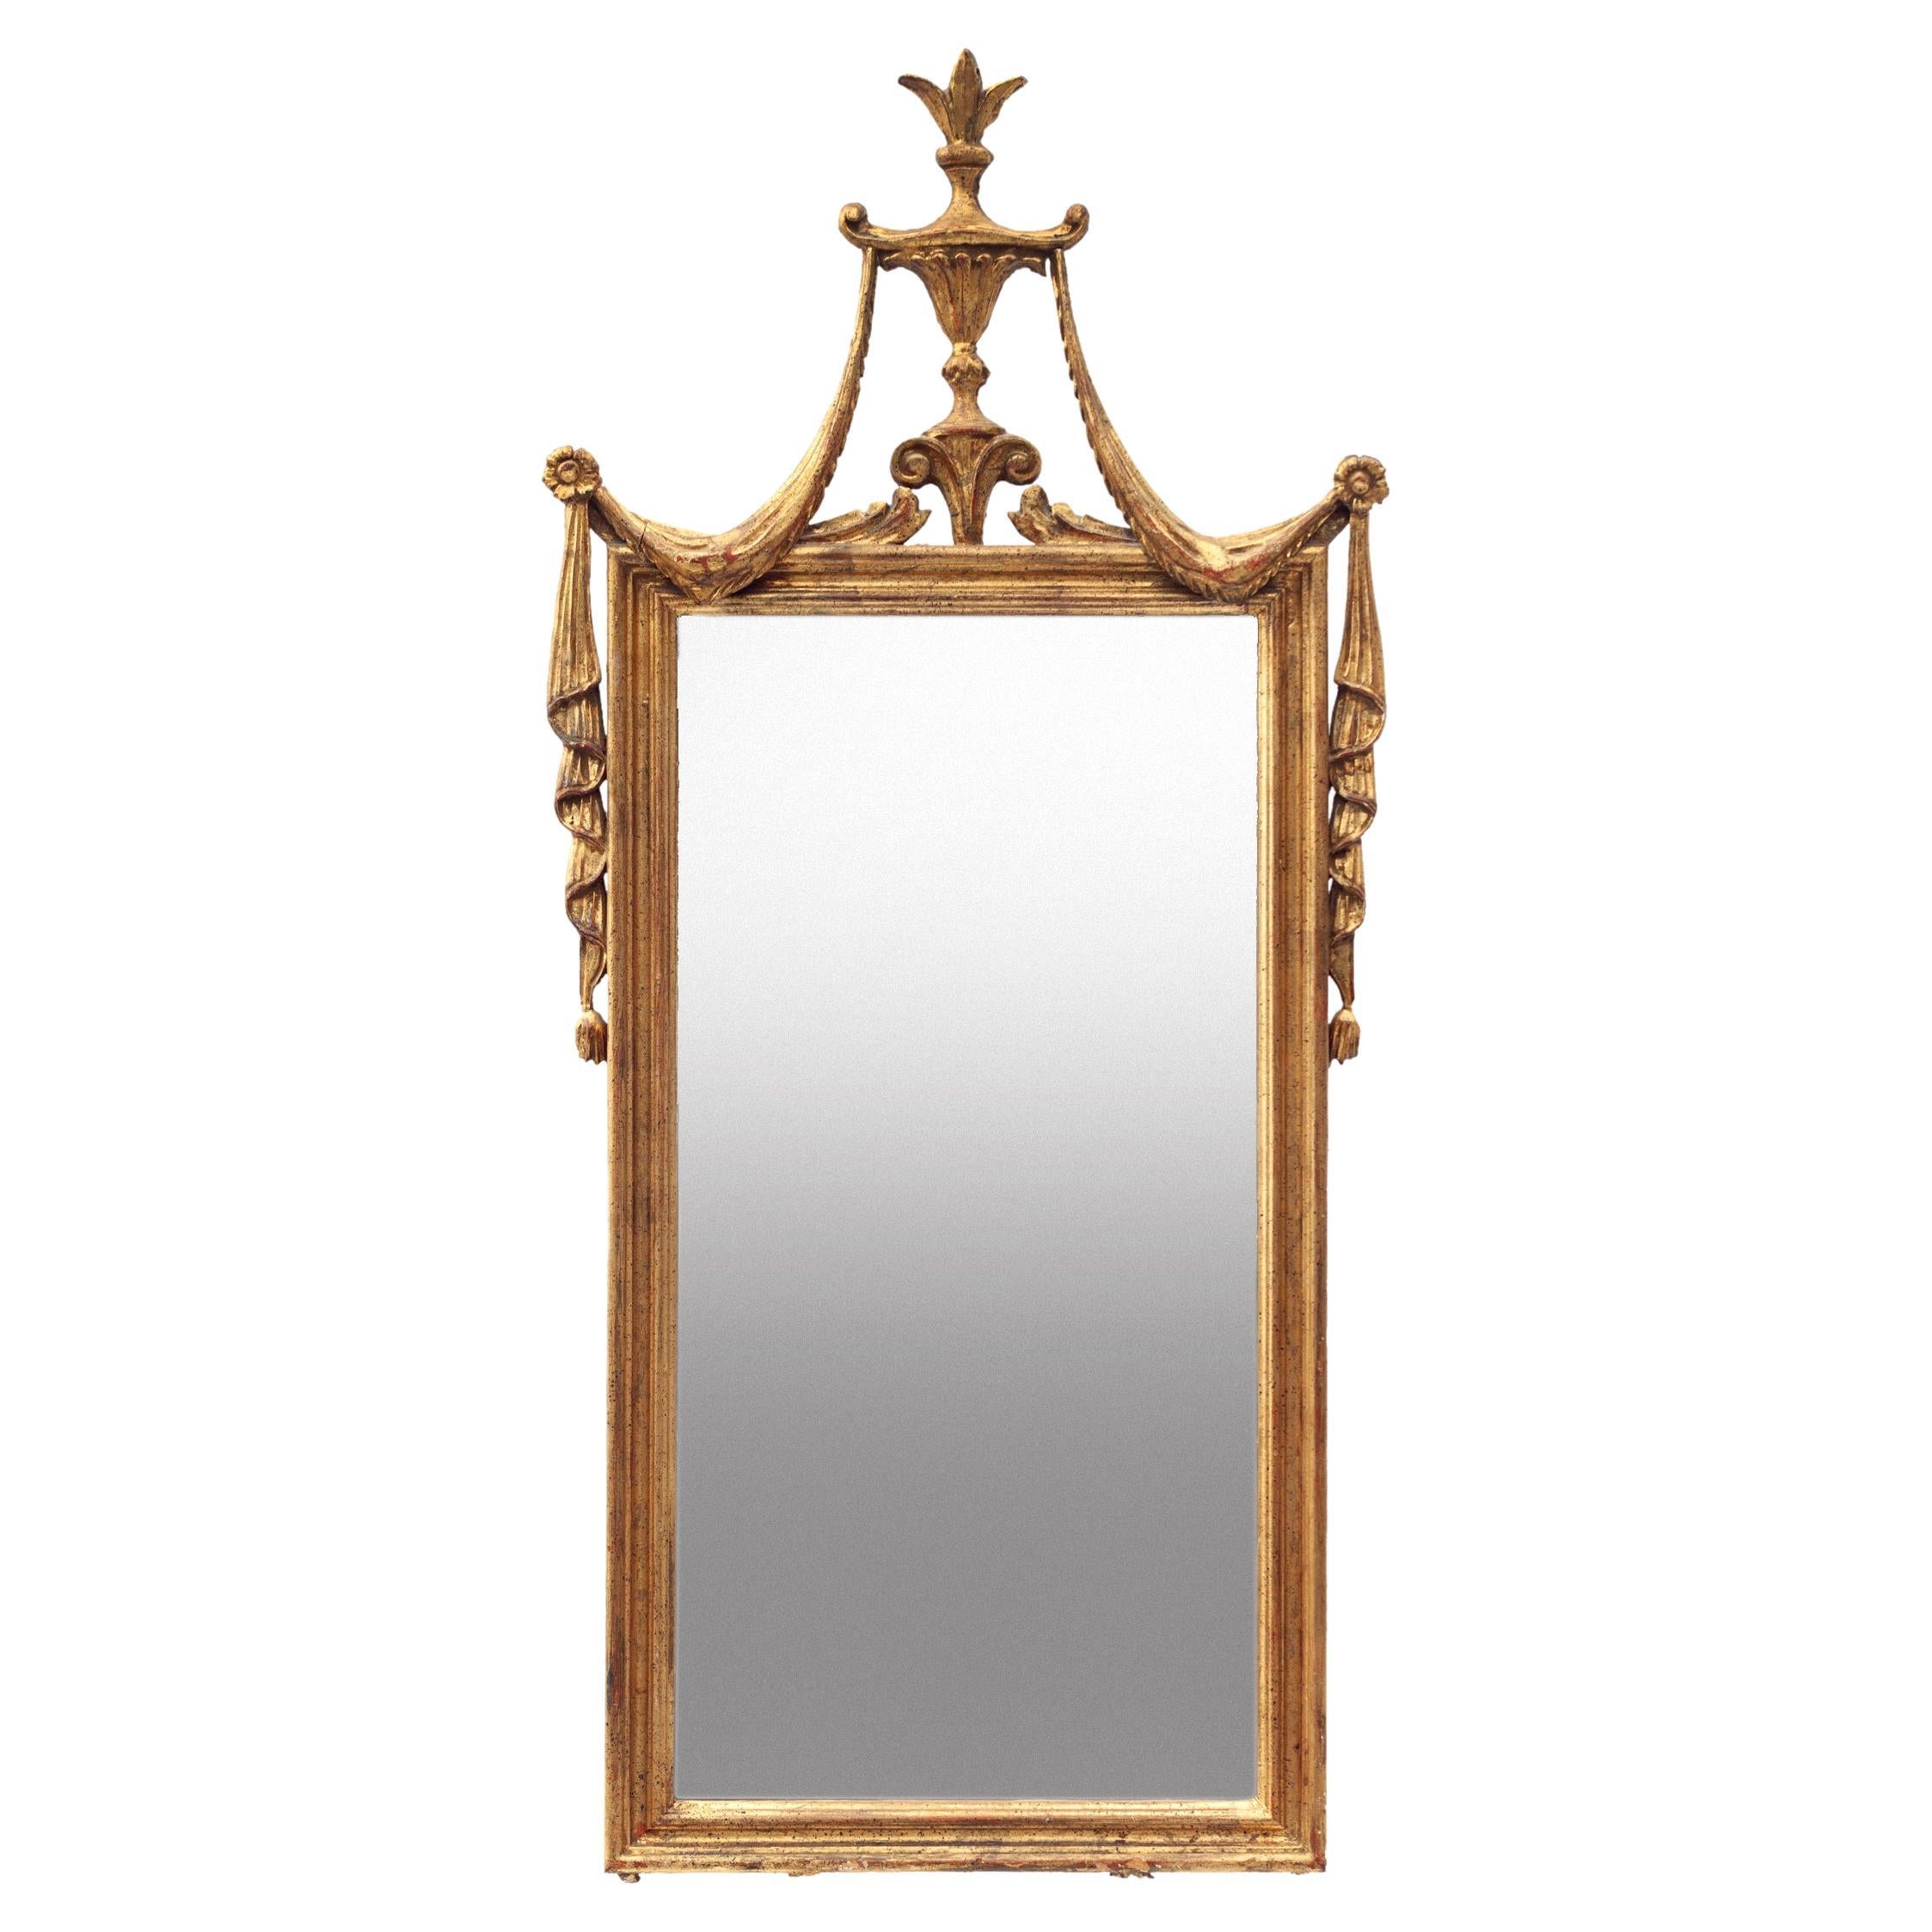 Italian Neoclassical Mirror with Urn & Swagged Drapery